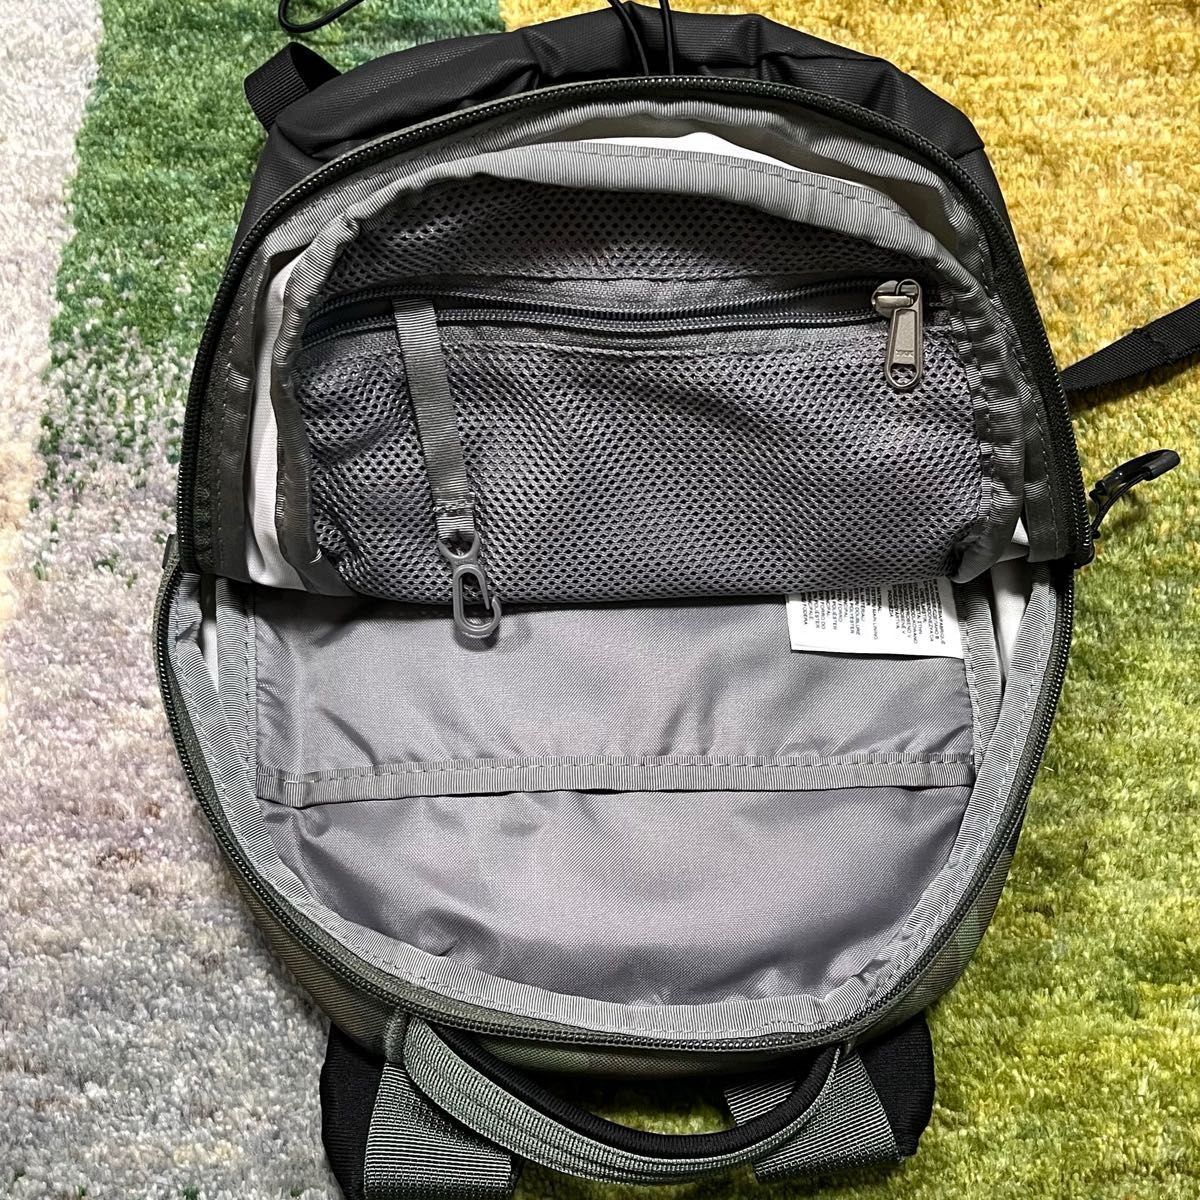 【THE NORTH FACE】Borealis Mini Backpack ボレアリス ミニ バックパック